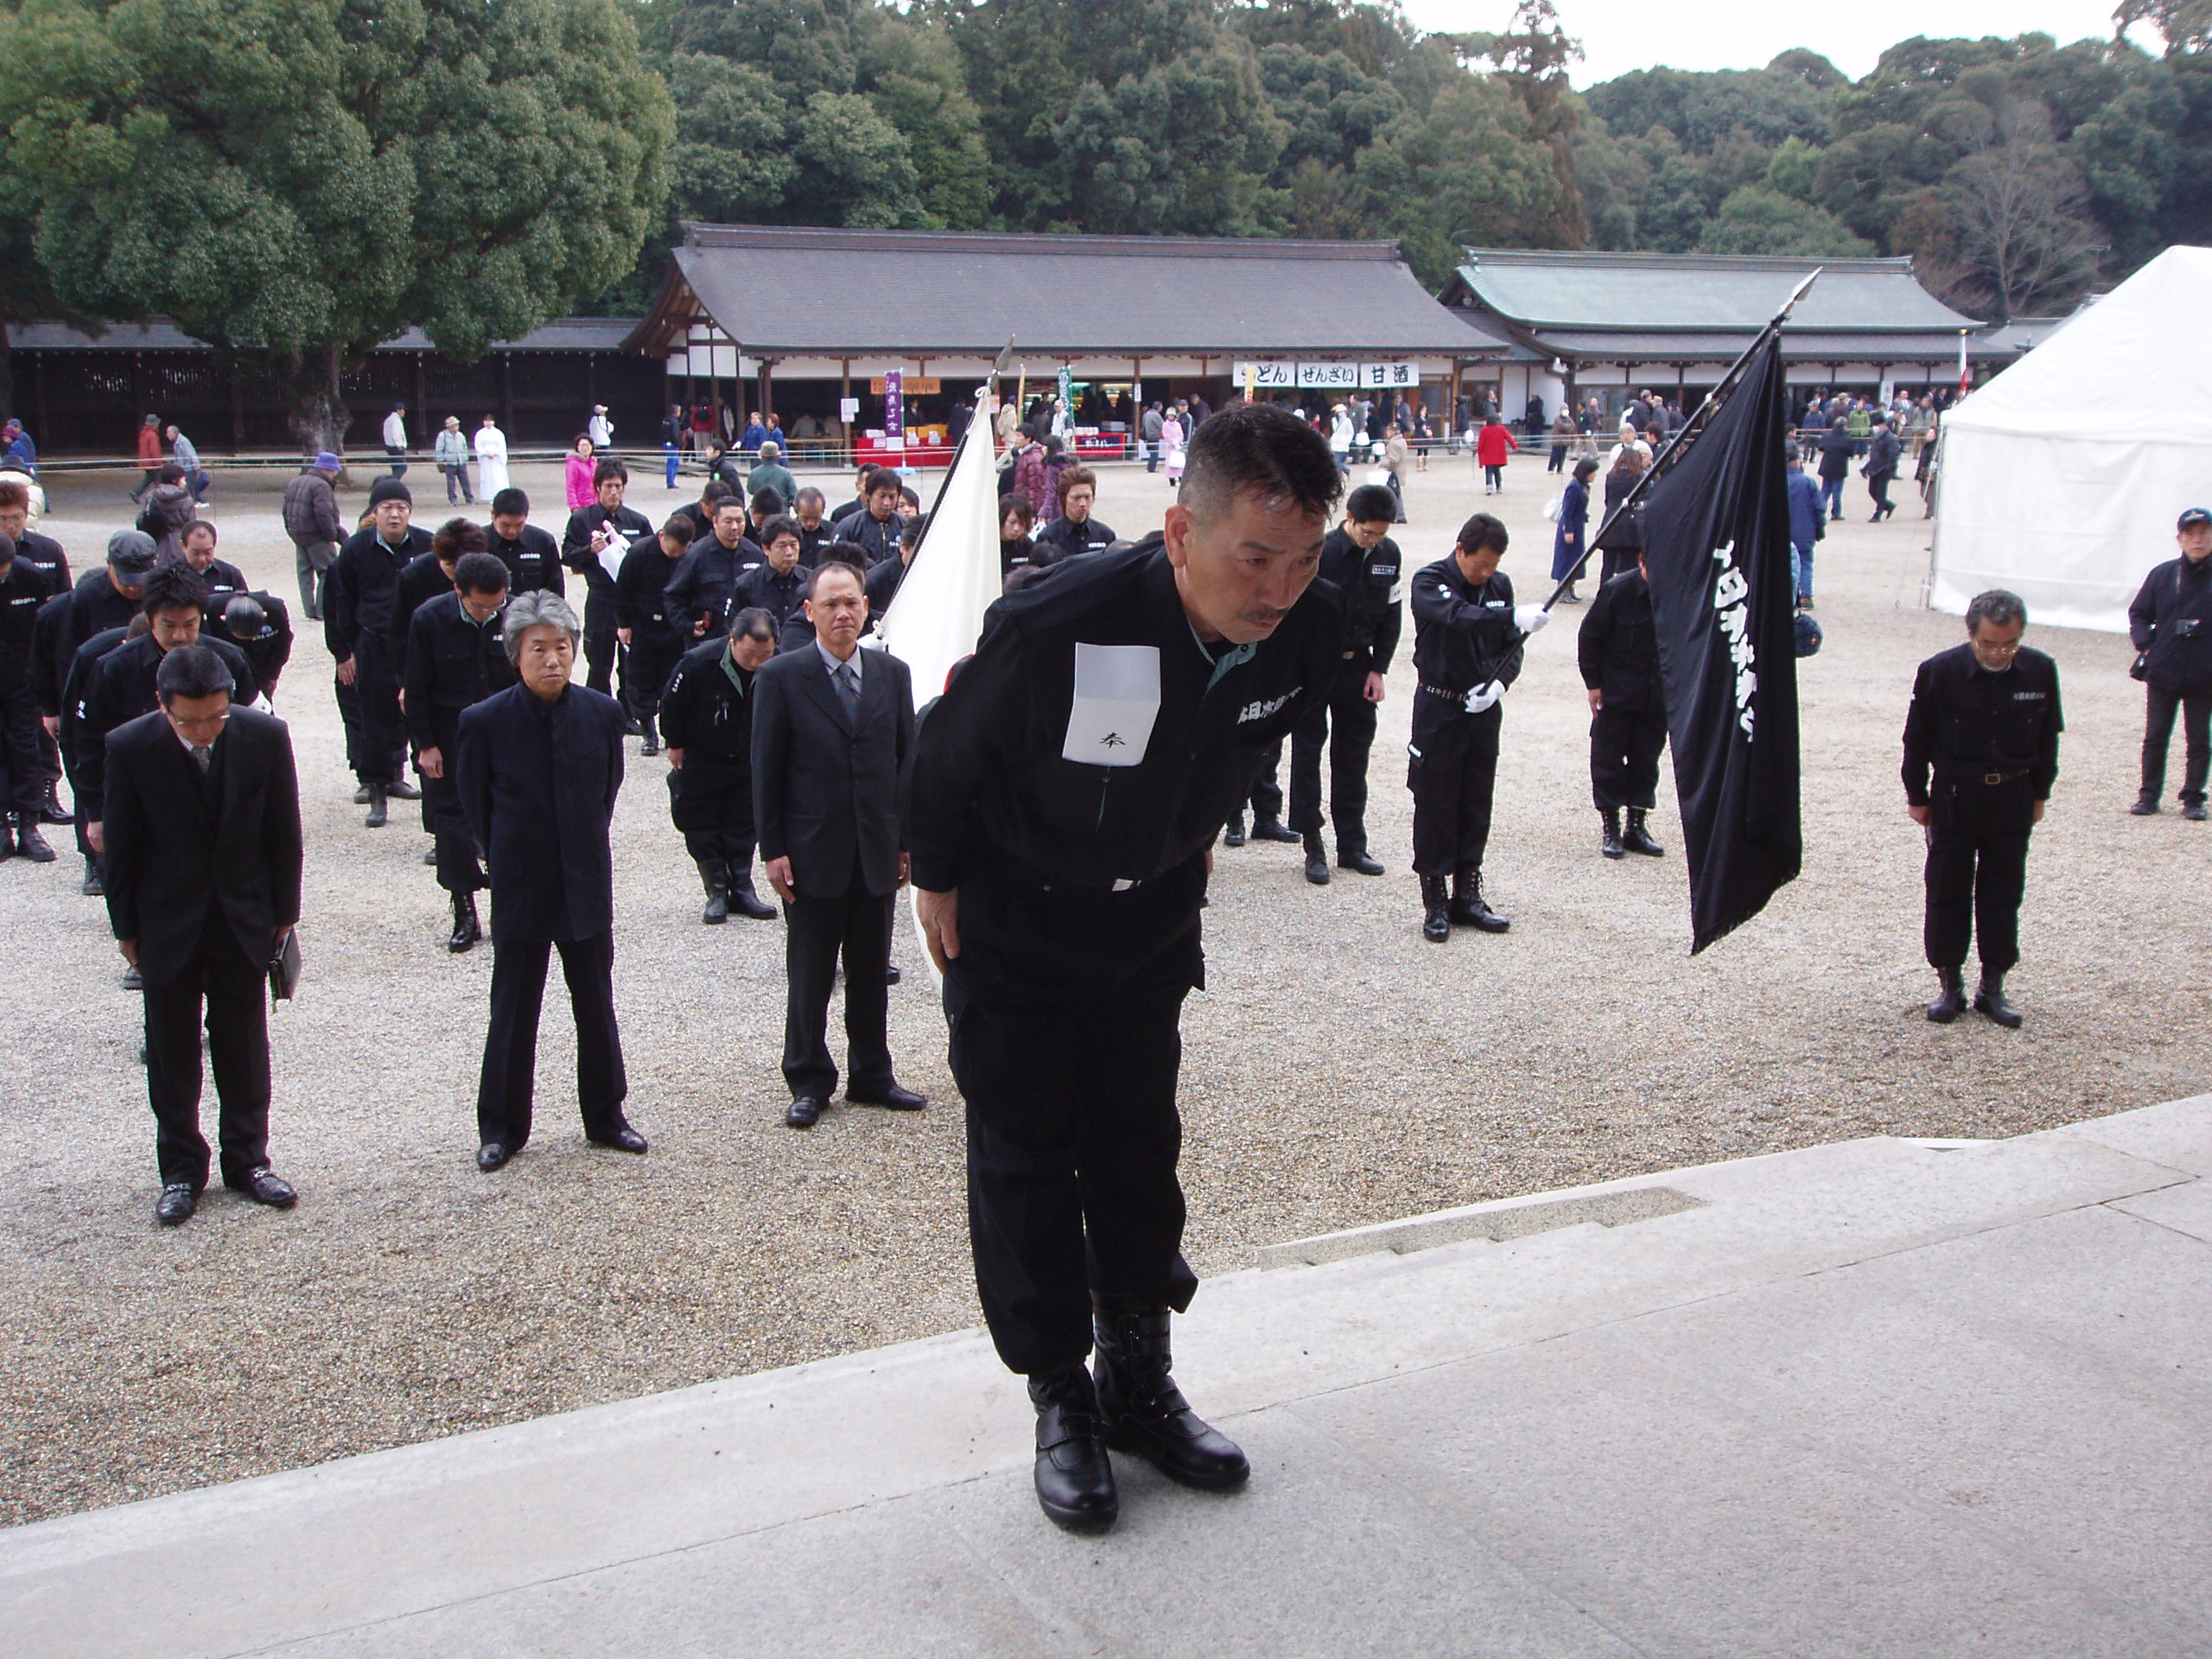 Under prime minister Abe Shinzo, nationalist groups have been emboldened, such as this paramilitary group worshipping legendary first emperor, Jimmu, at Kashihara Jingu.